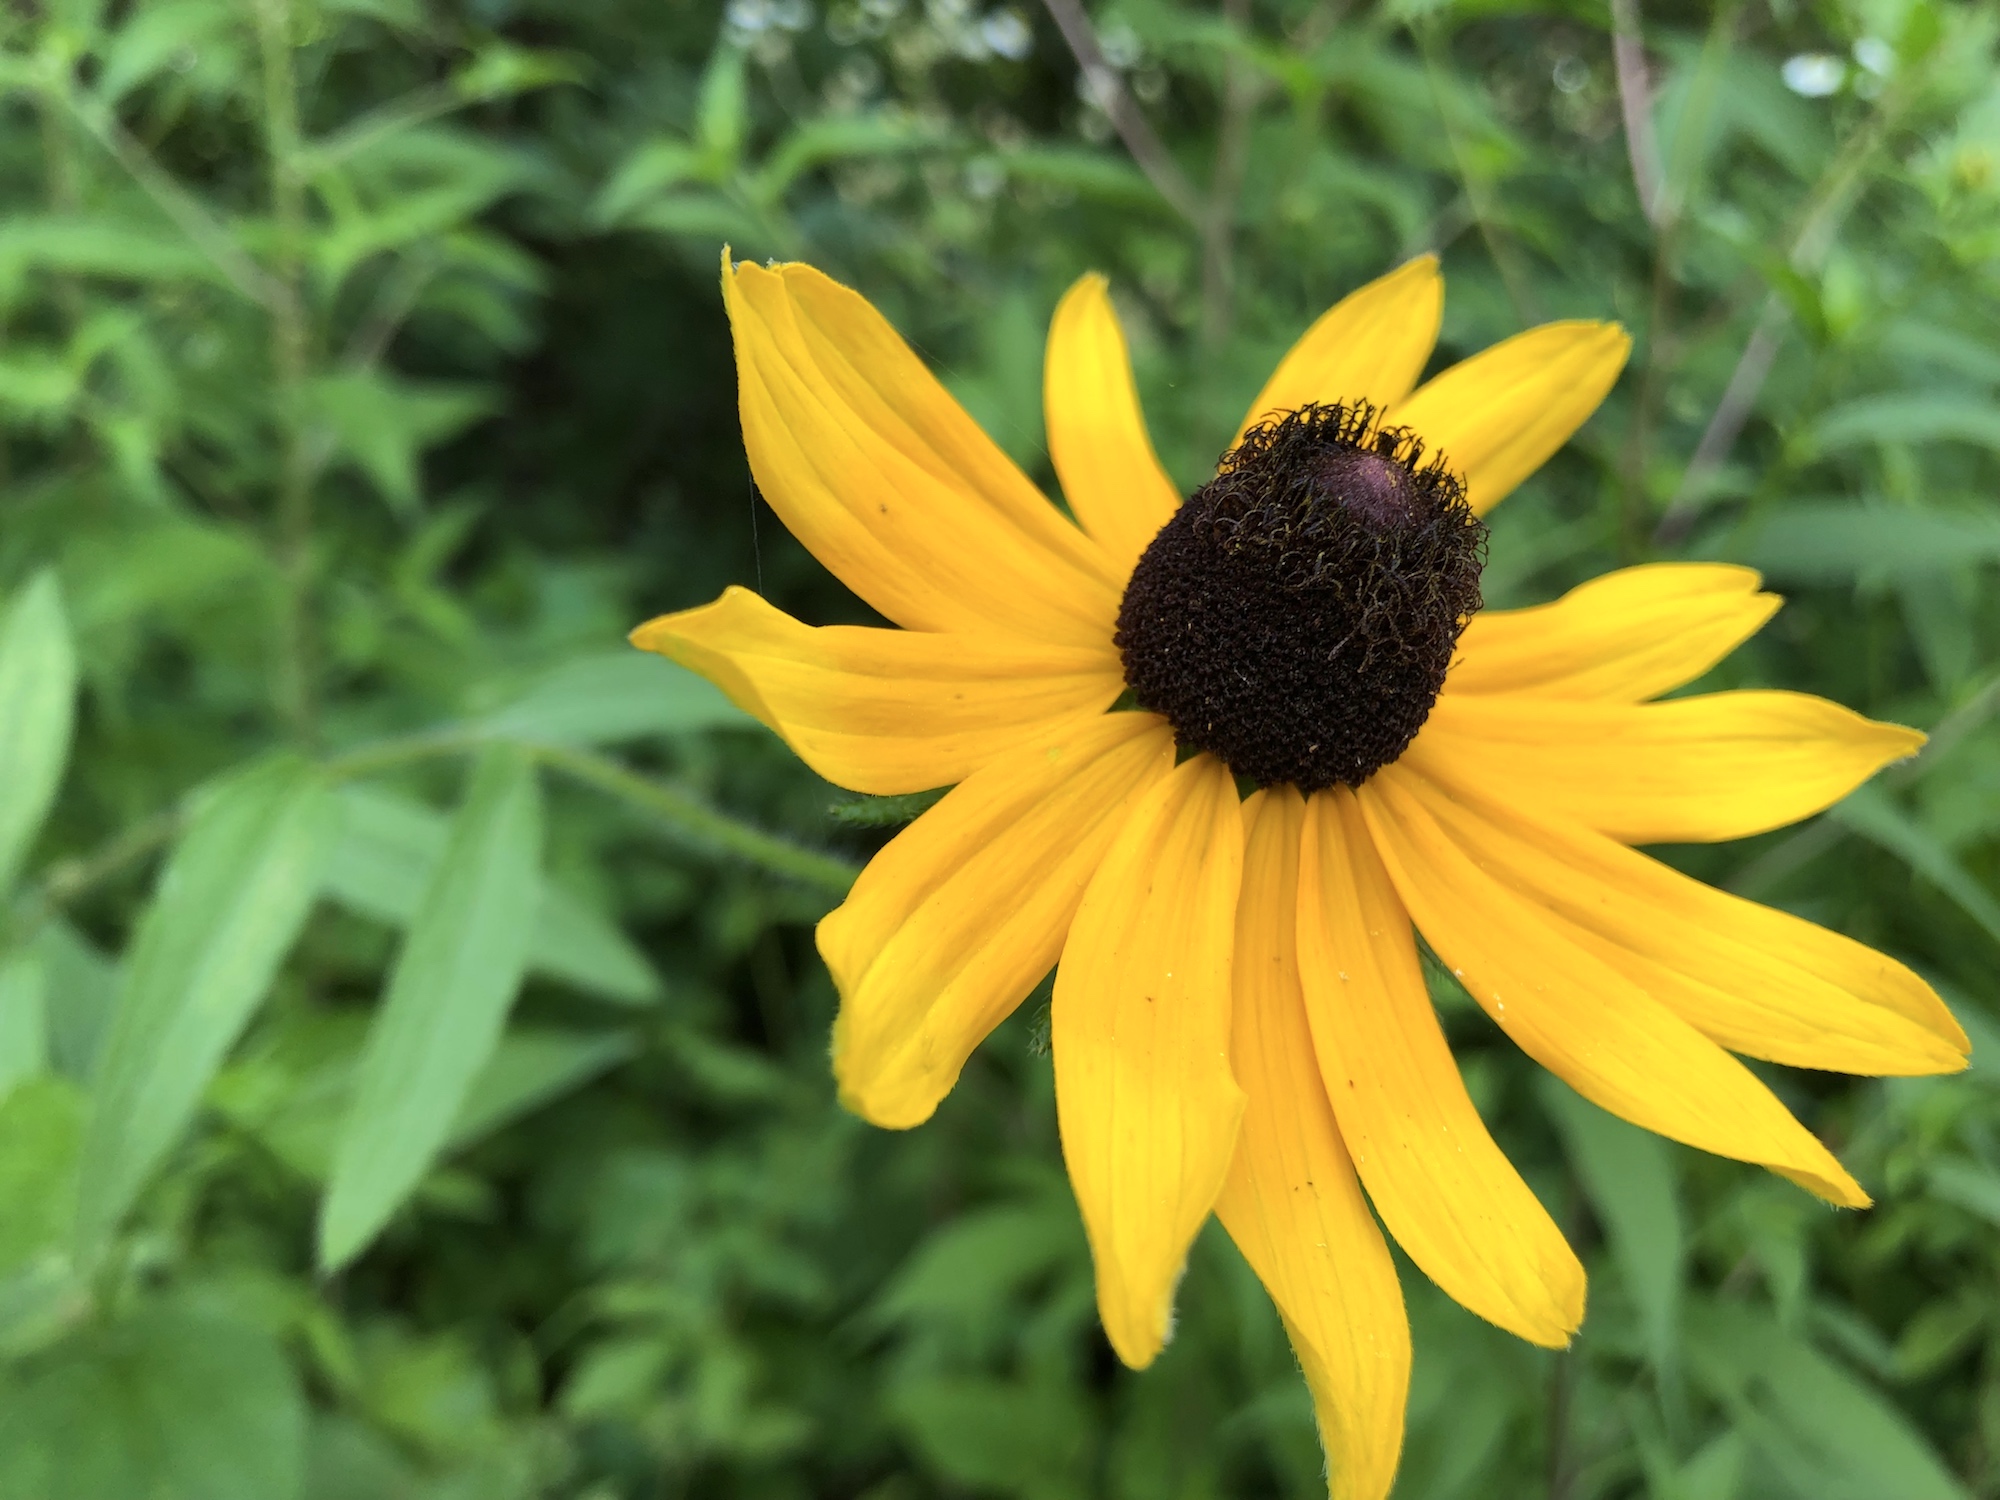 Black-eyed Susan on banks of Marion Dunn Pond in Madison, Wisconsin on July 25, 2019.